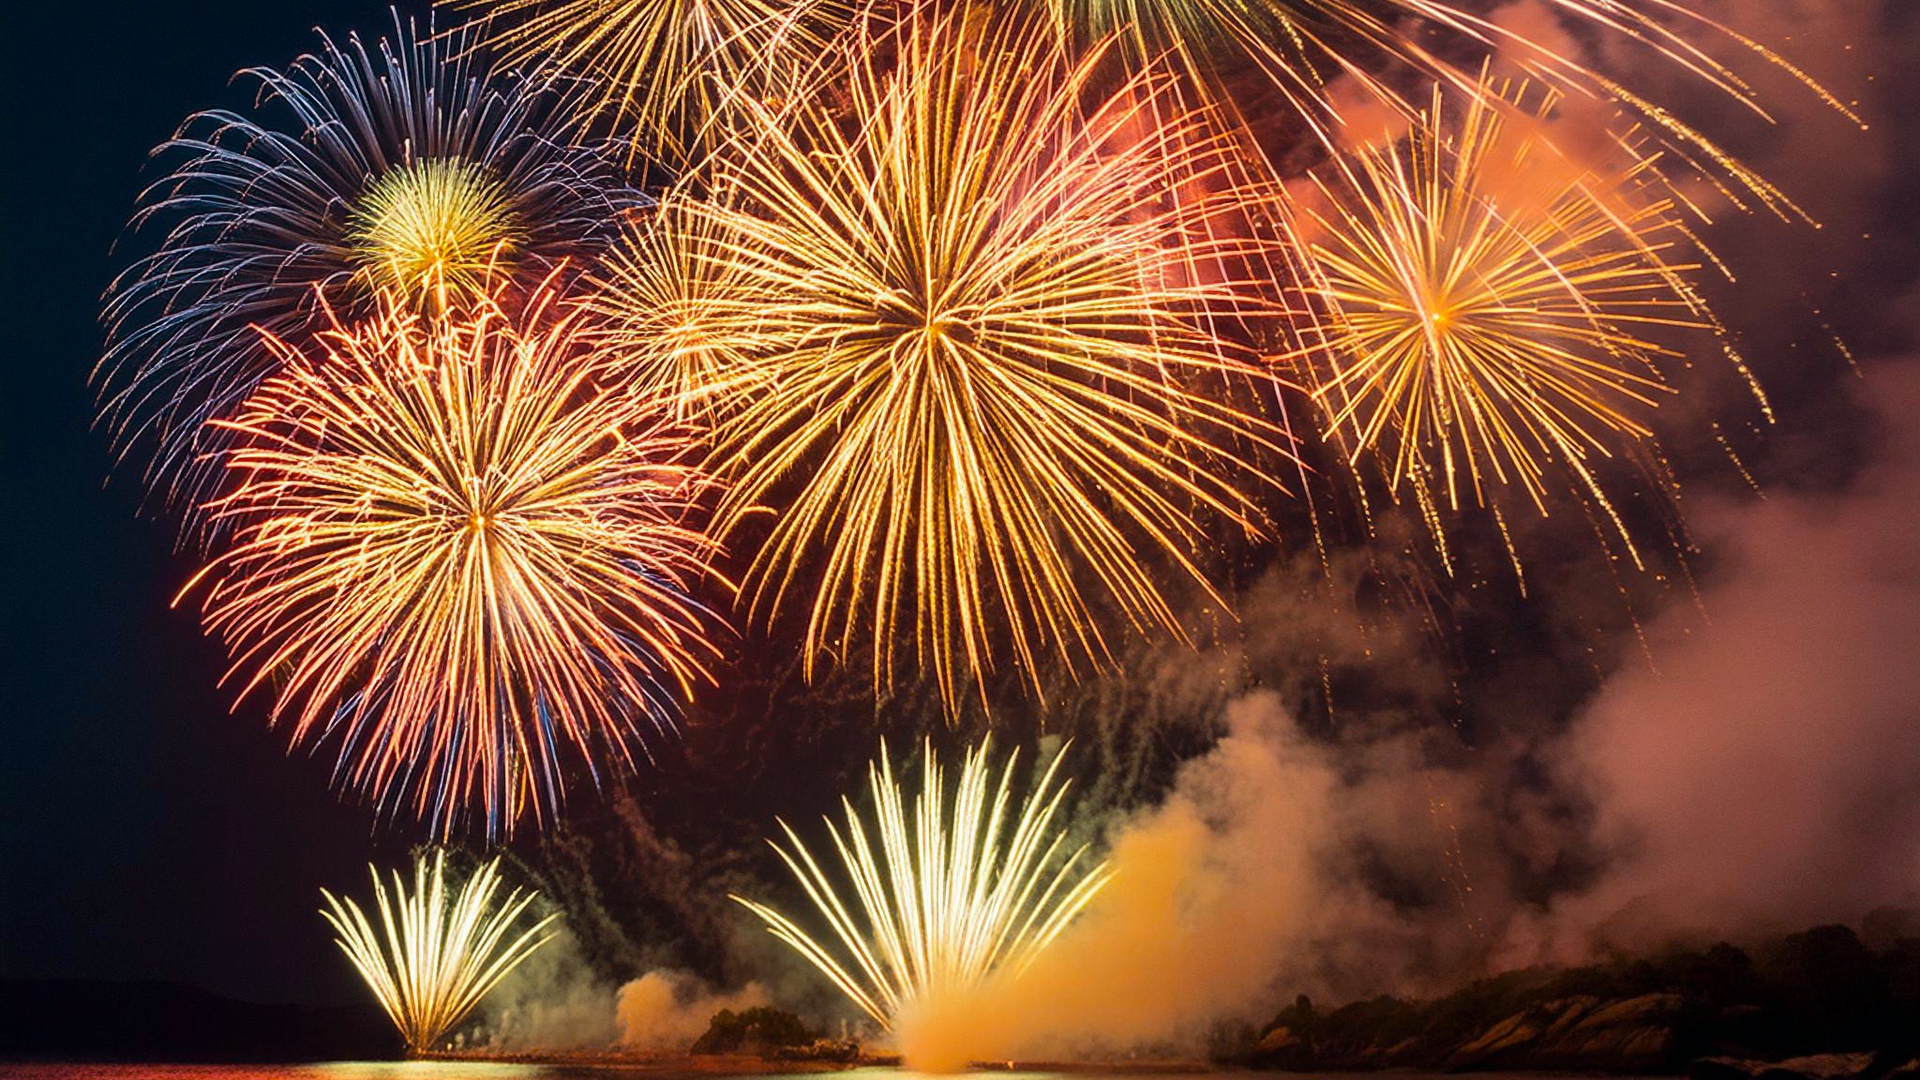 Keeping your Independence Day fireworks legal